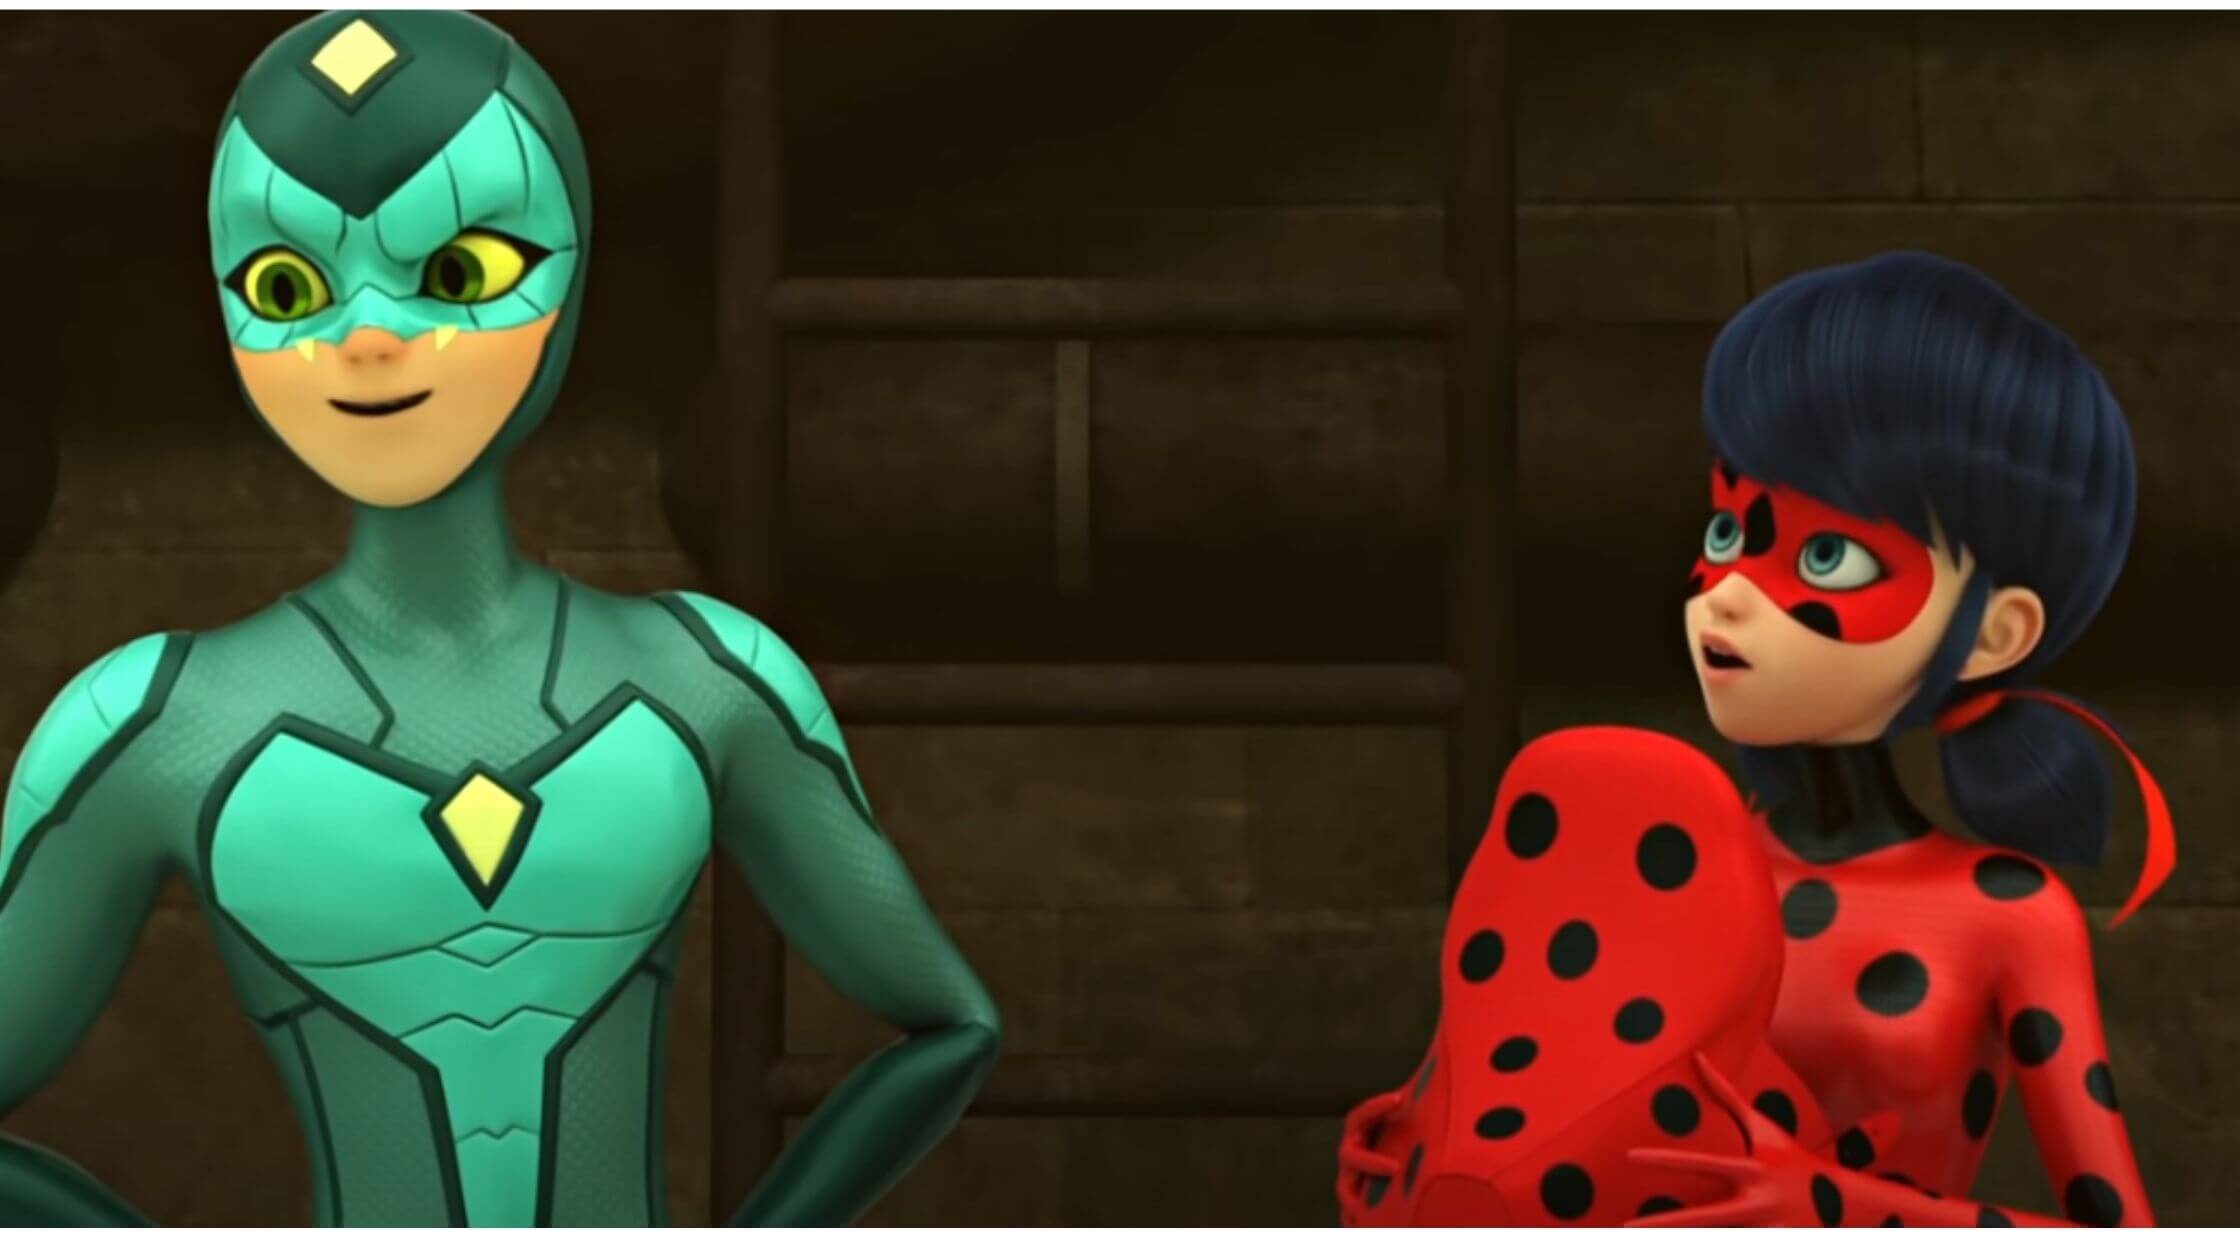 Its-OFFICIAL-The-Miraculous-Ladybug-Close-To-Its-Final-Release-Season-5-Titles-Released-1